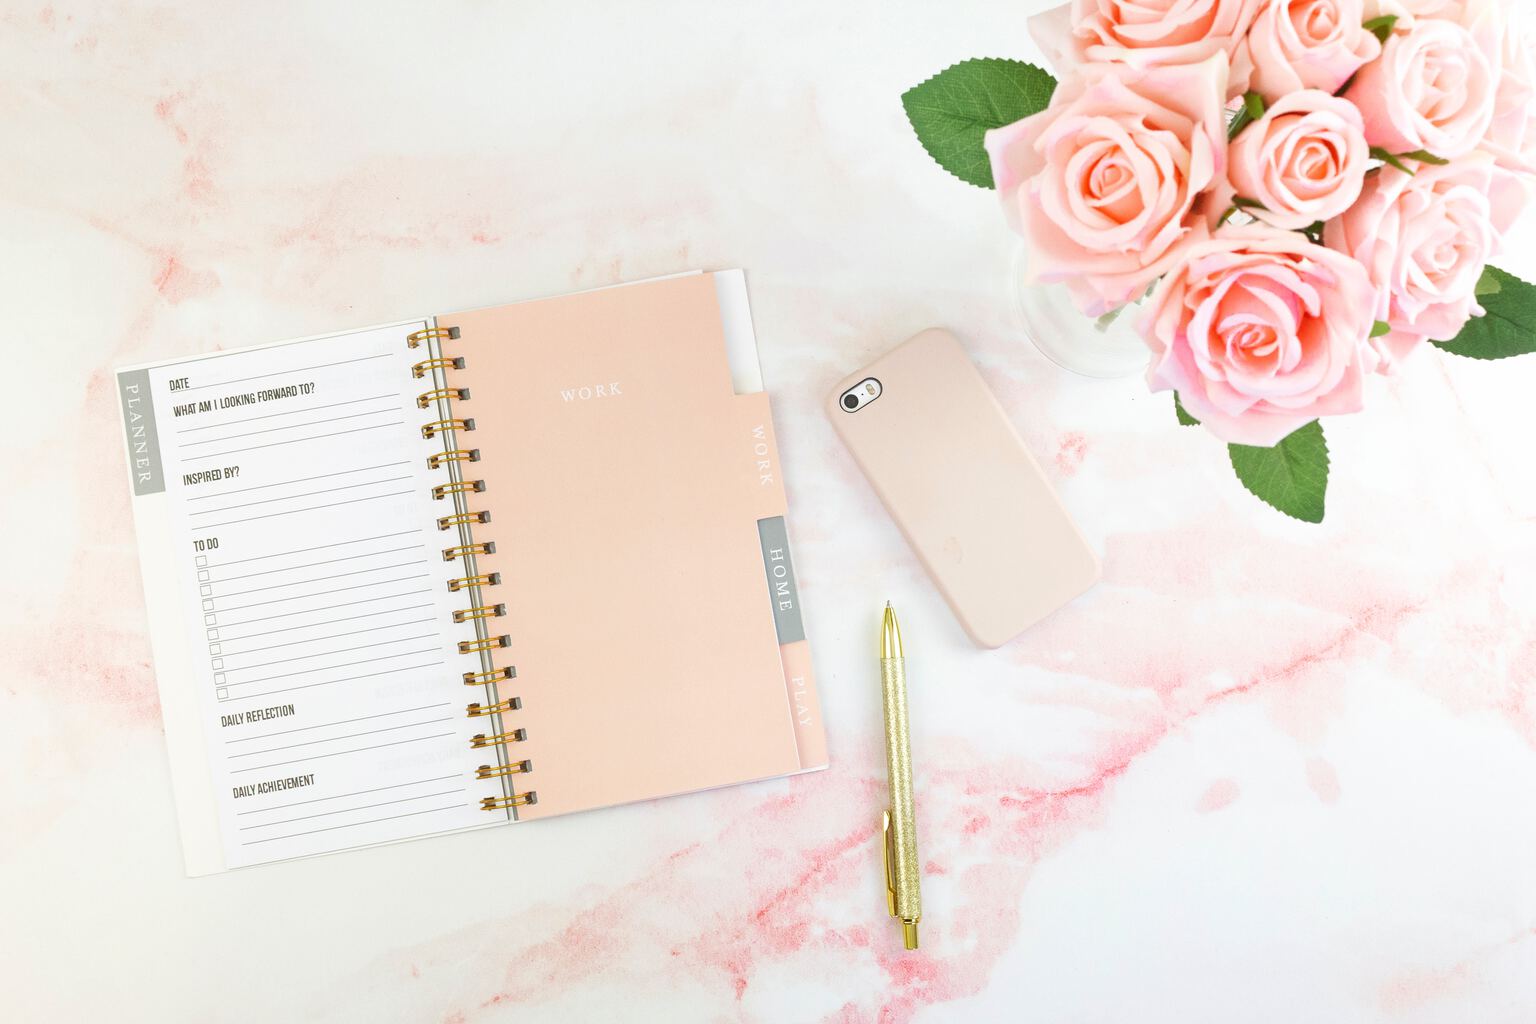 Flat lay on light pink marble surface featuring planner, gold-colored pen, iPhone in pale pink case, and pale pink roses